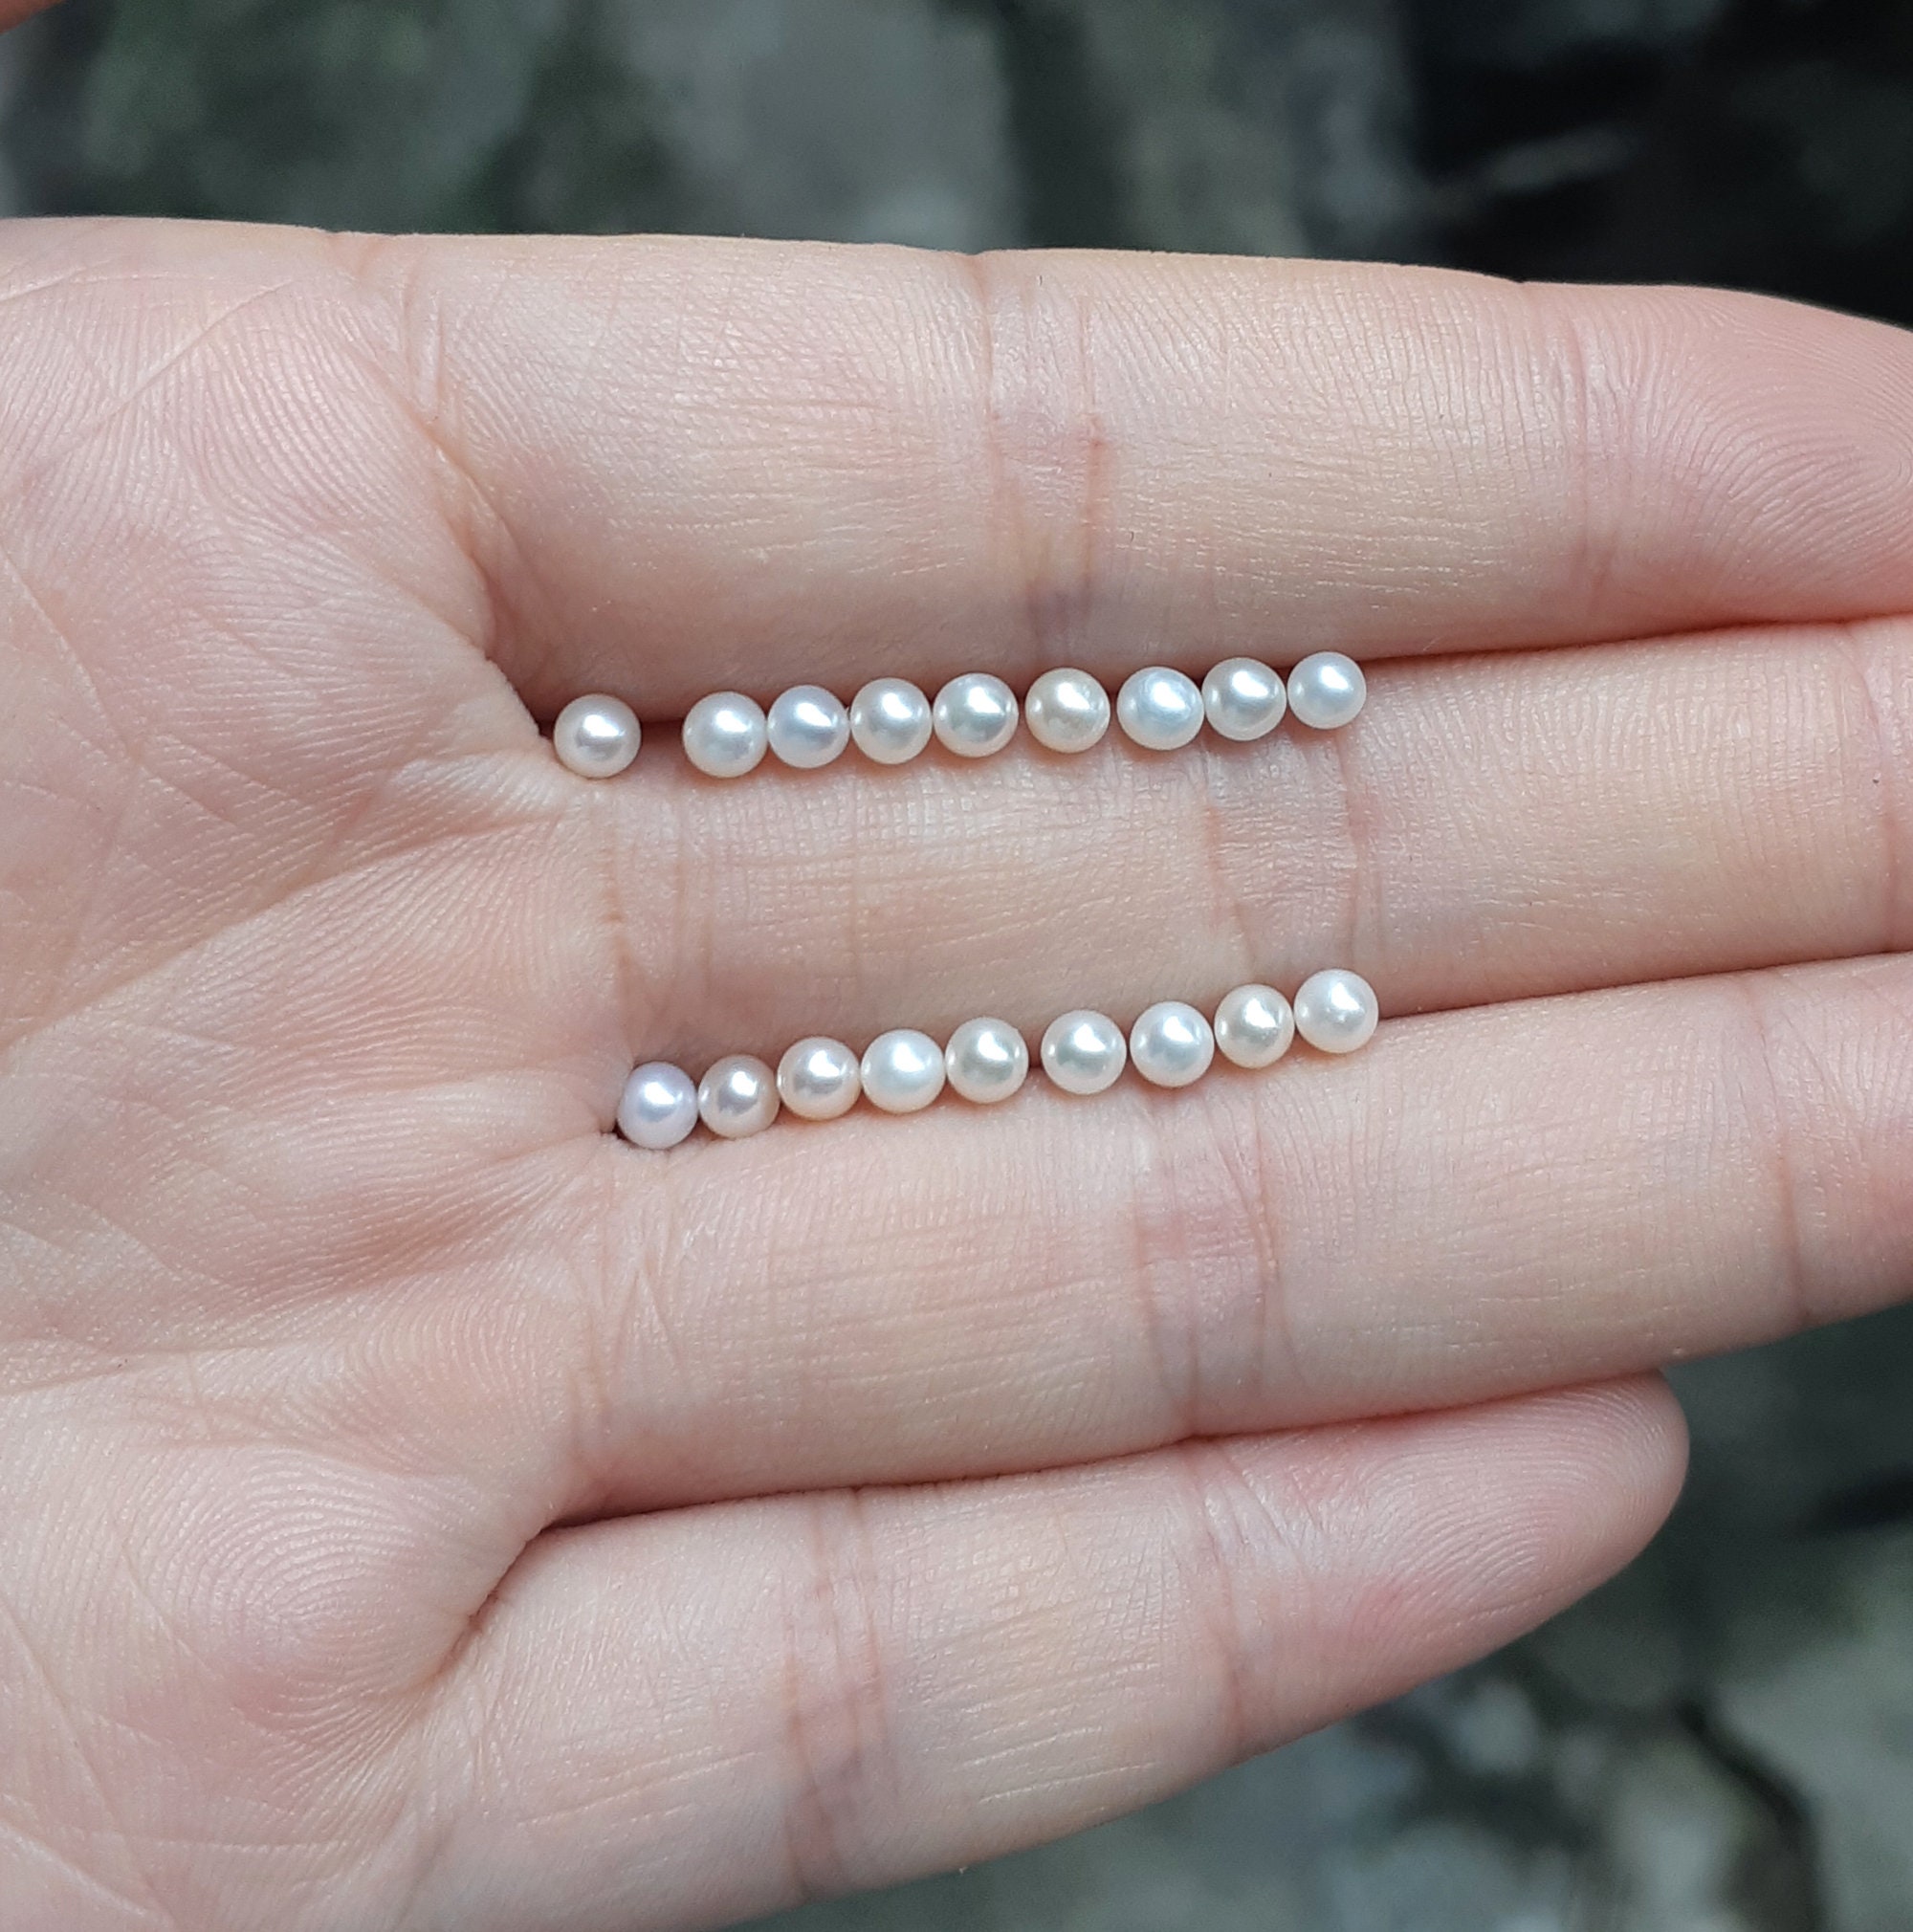 9-13mm Freshwater Baroque Star Pearl Beads,star Baroque Pearls for Jewelry  Making Pearl Strand PB430 